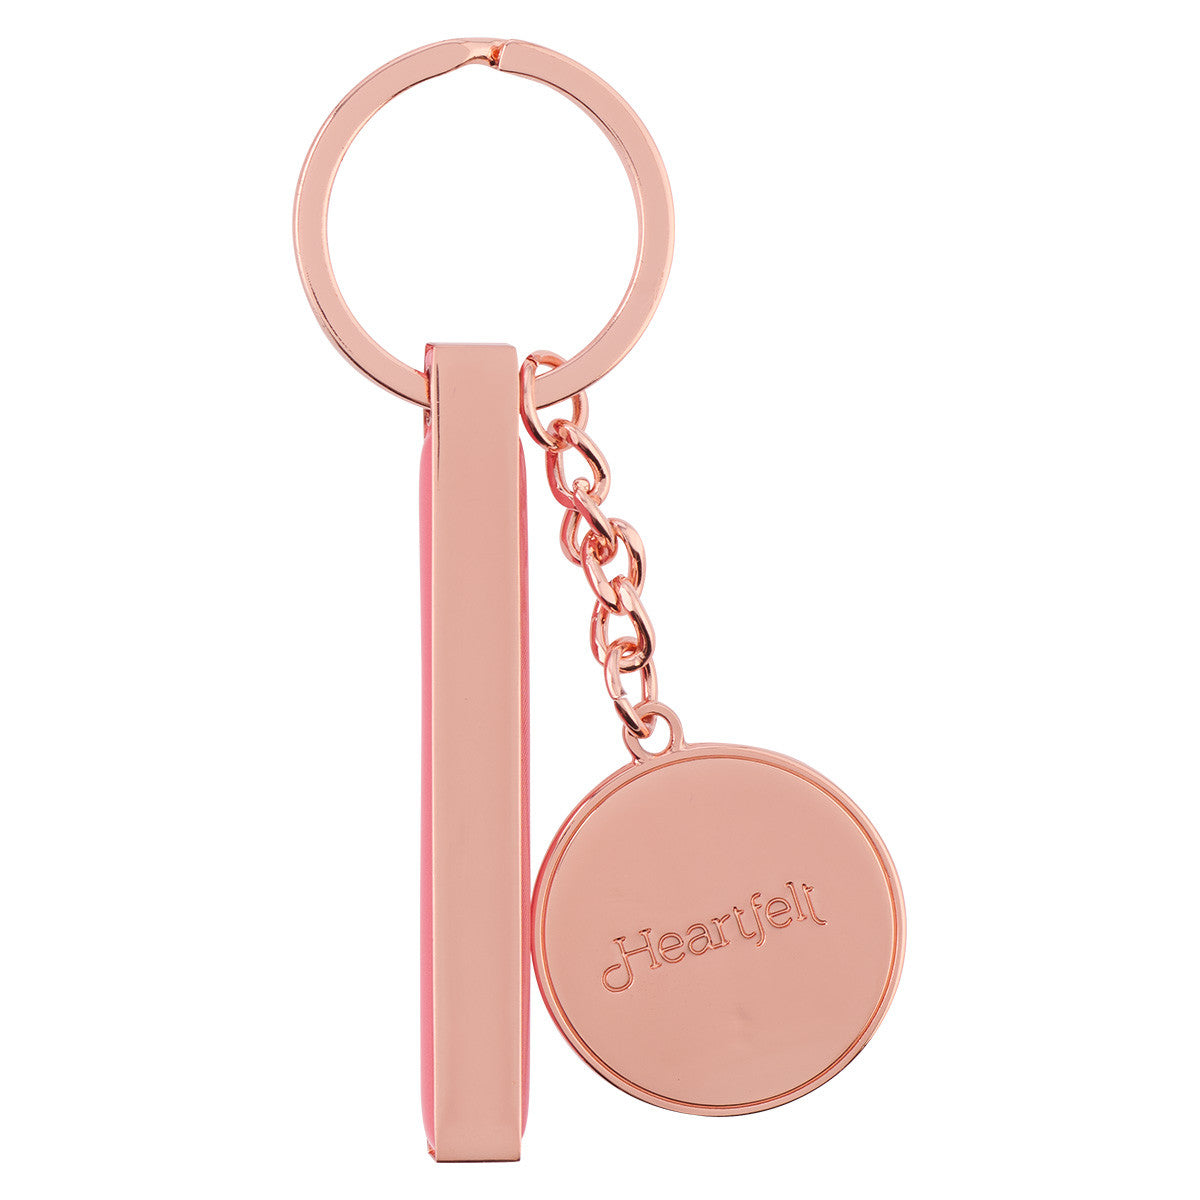 Shine Your Light Pink Petals Rose Gold Key Ring - The Christian Gift Company